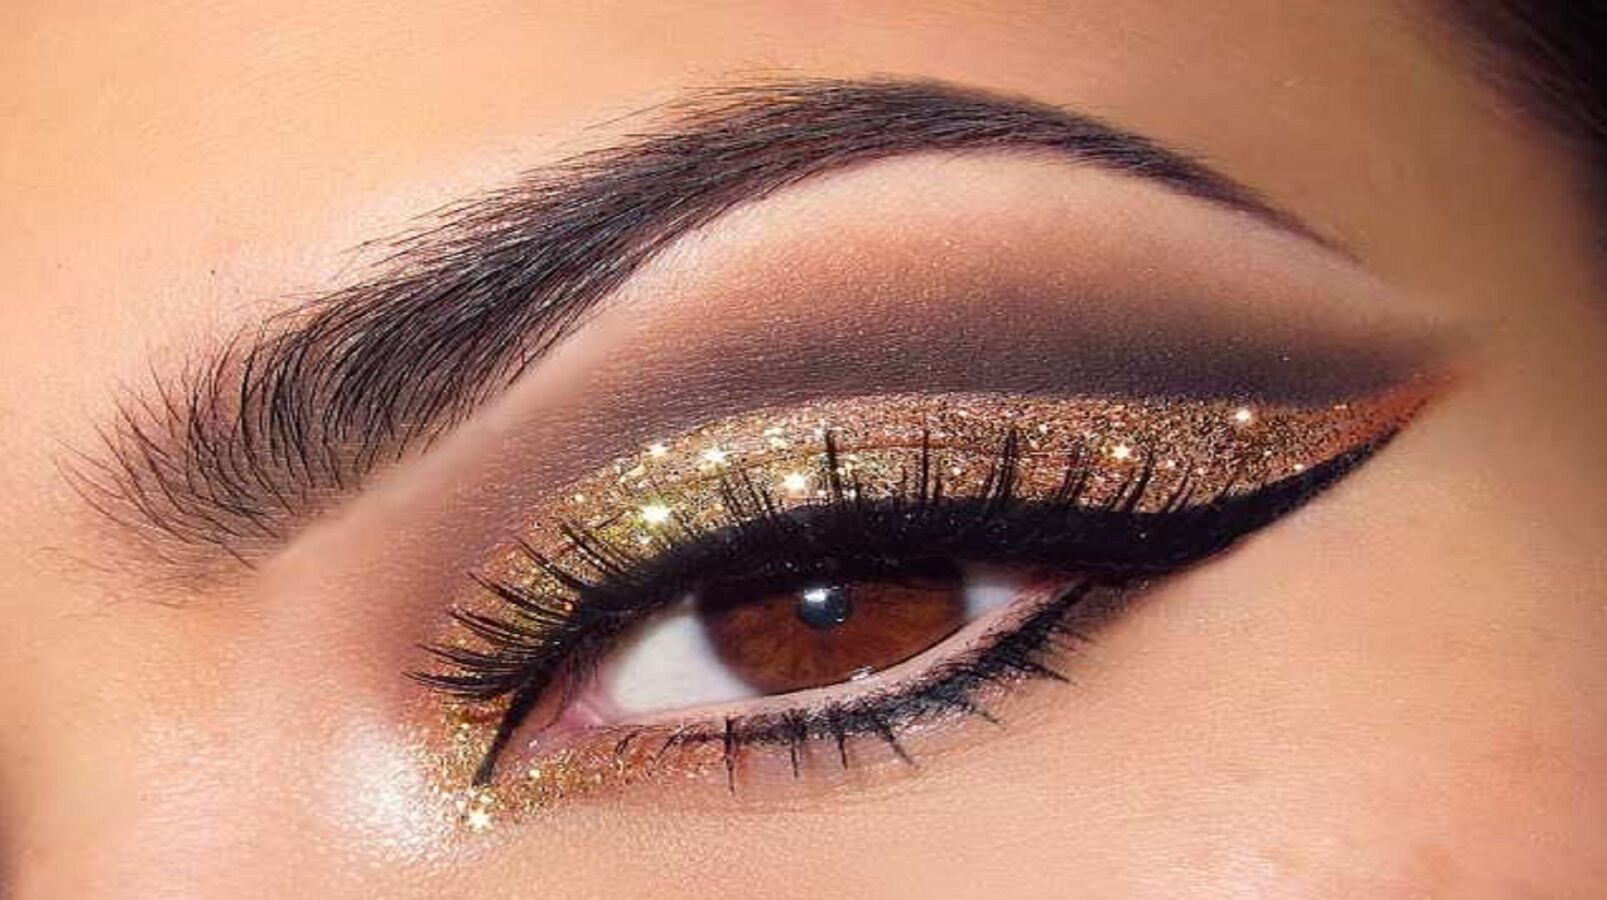 Prom Eye Makeup For Brown Eyes 50 Most Trendy Brown Eyes Makeup Idea You Must Try For Prom Or Party